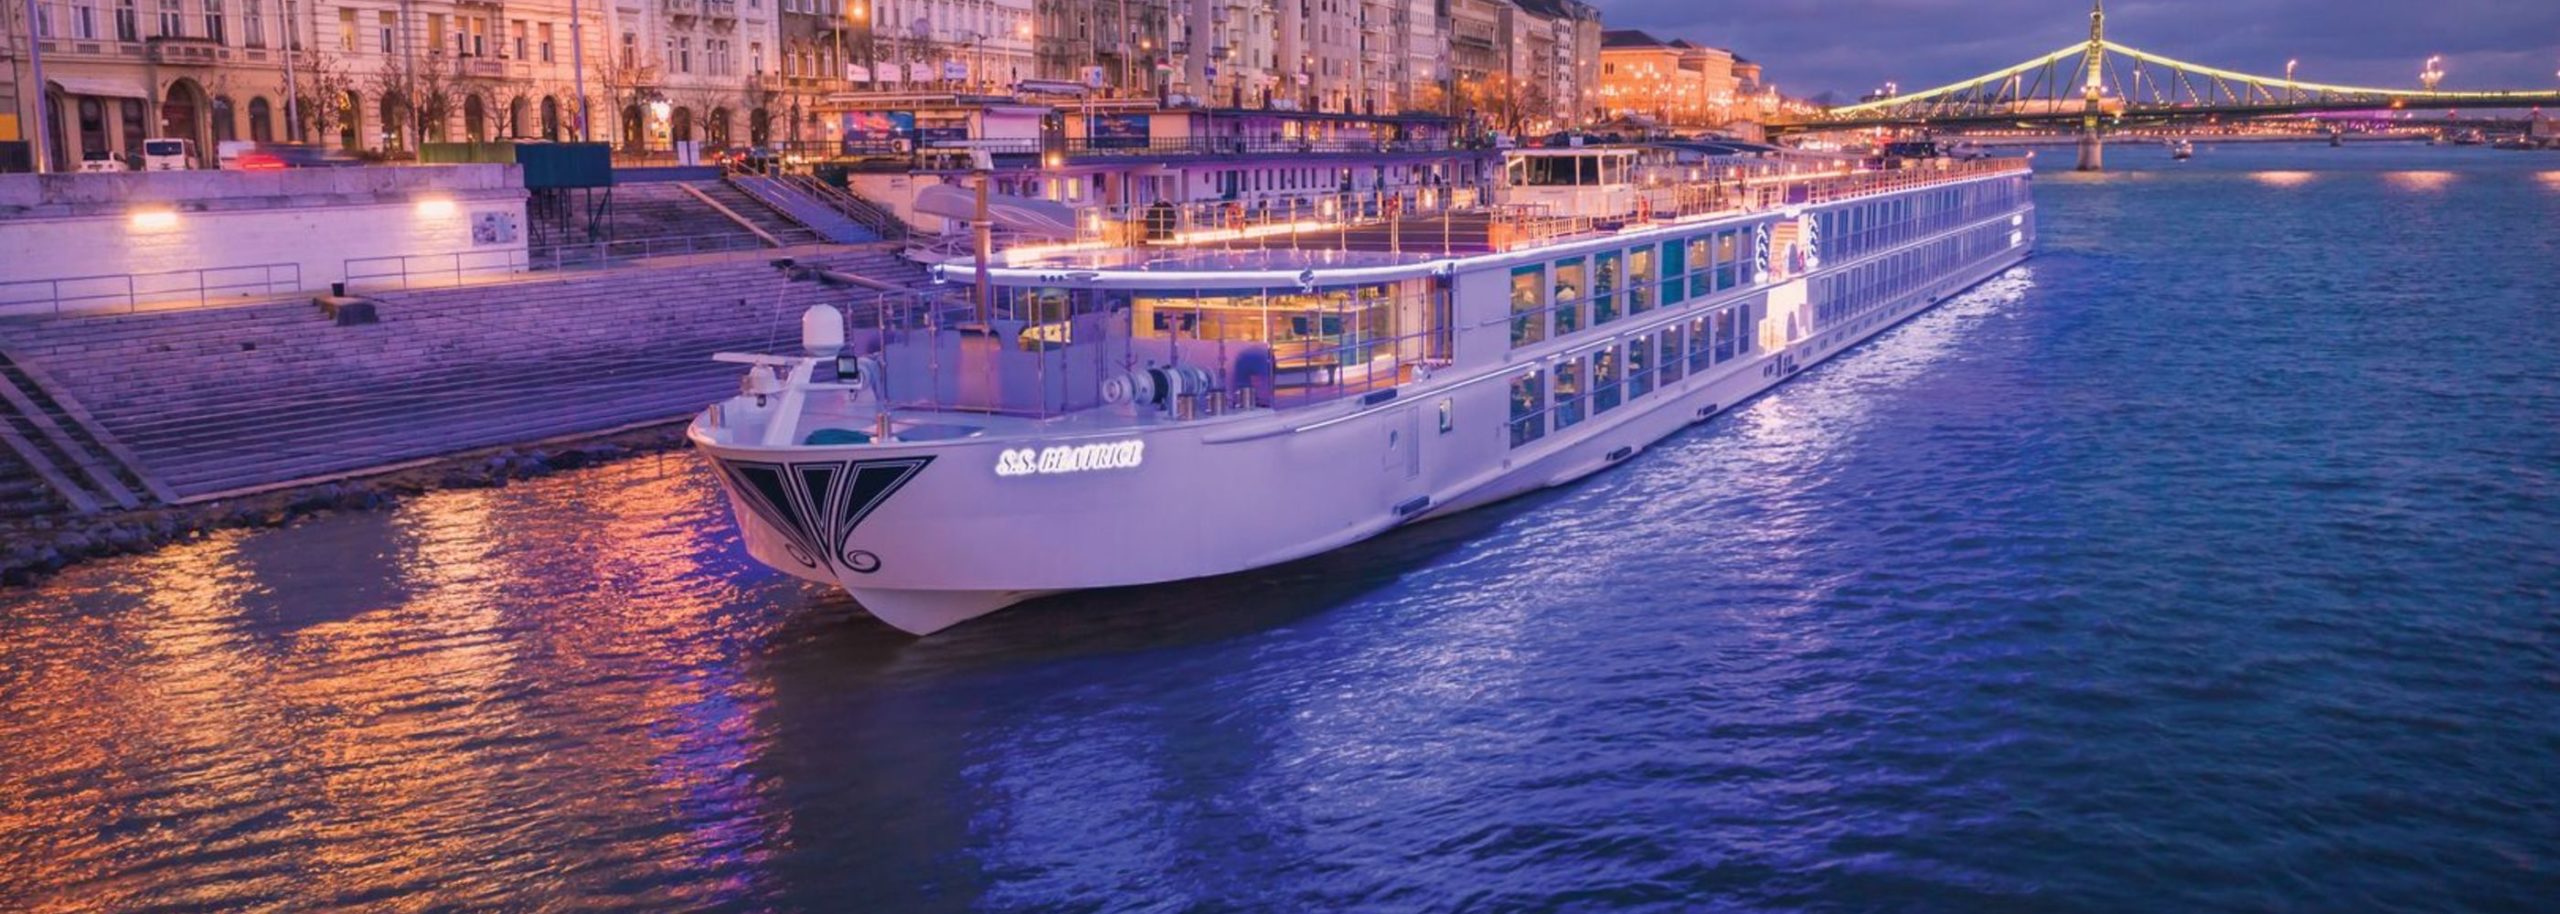 uniworld river cruises terms and conditions